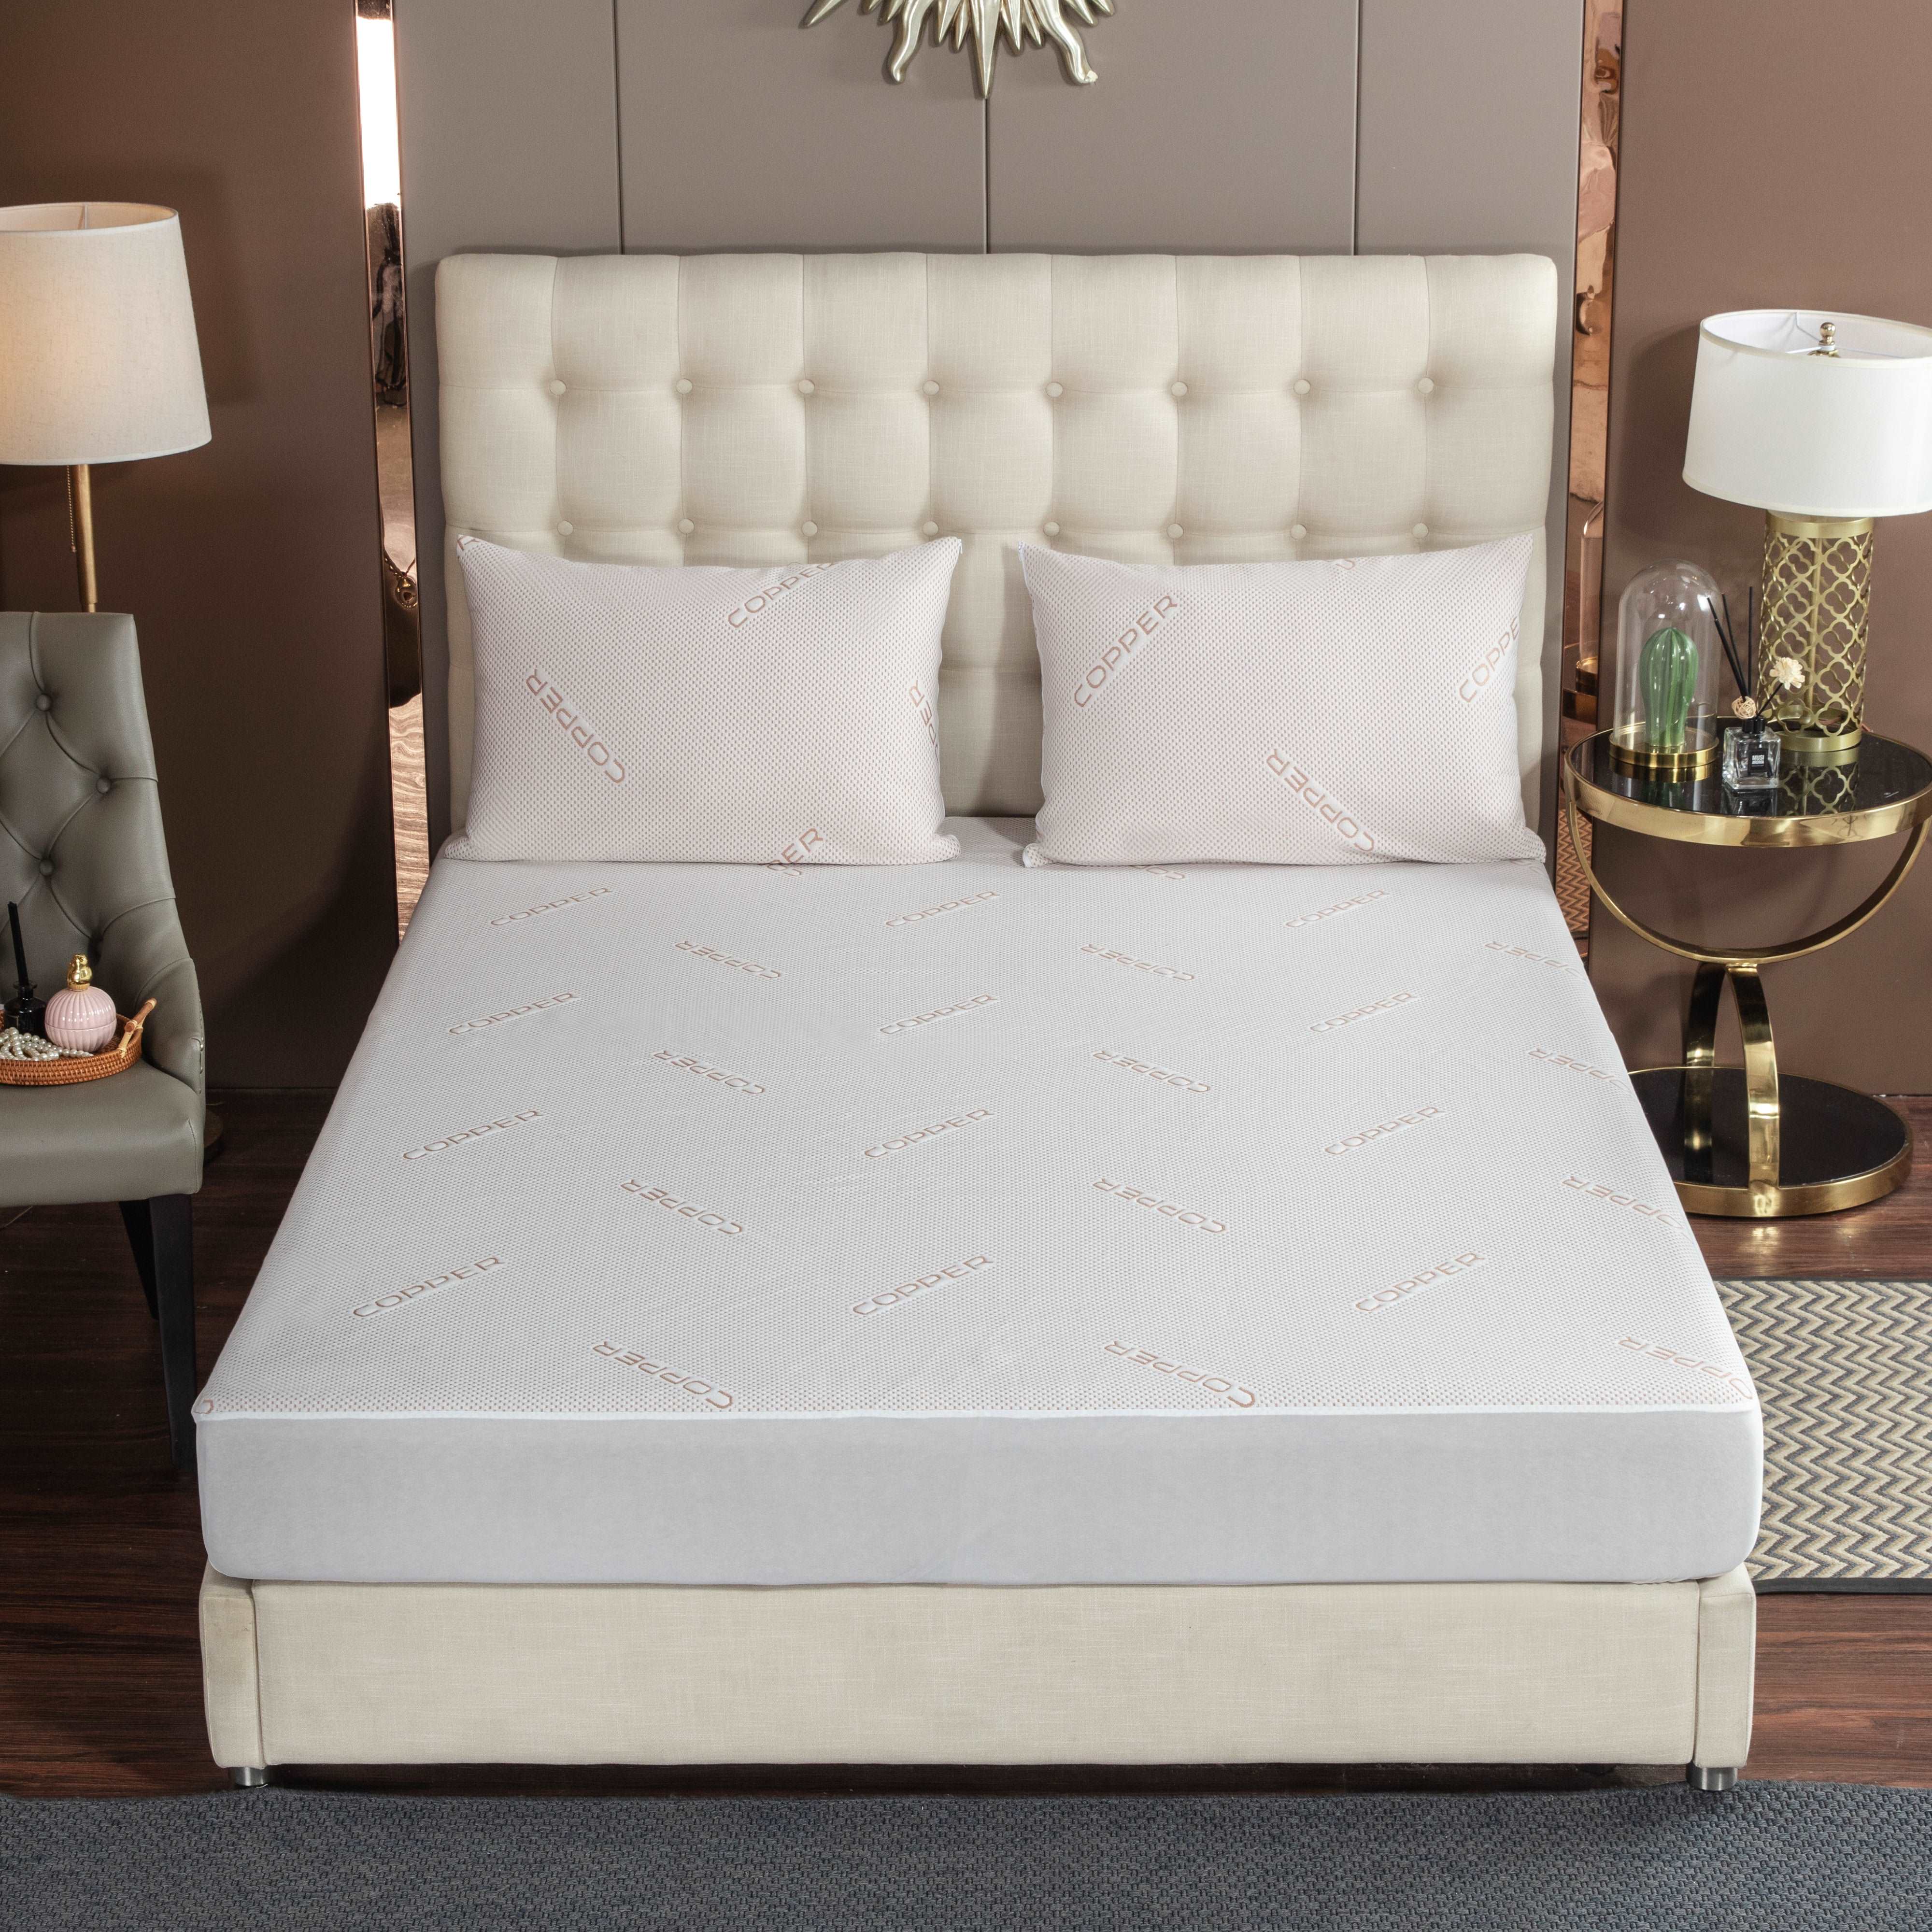 Copper Mattress Protector, Copper Infused Mattress Protector